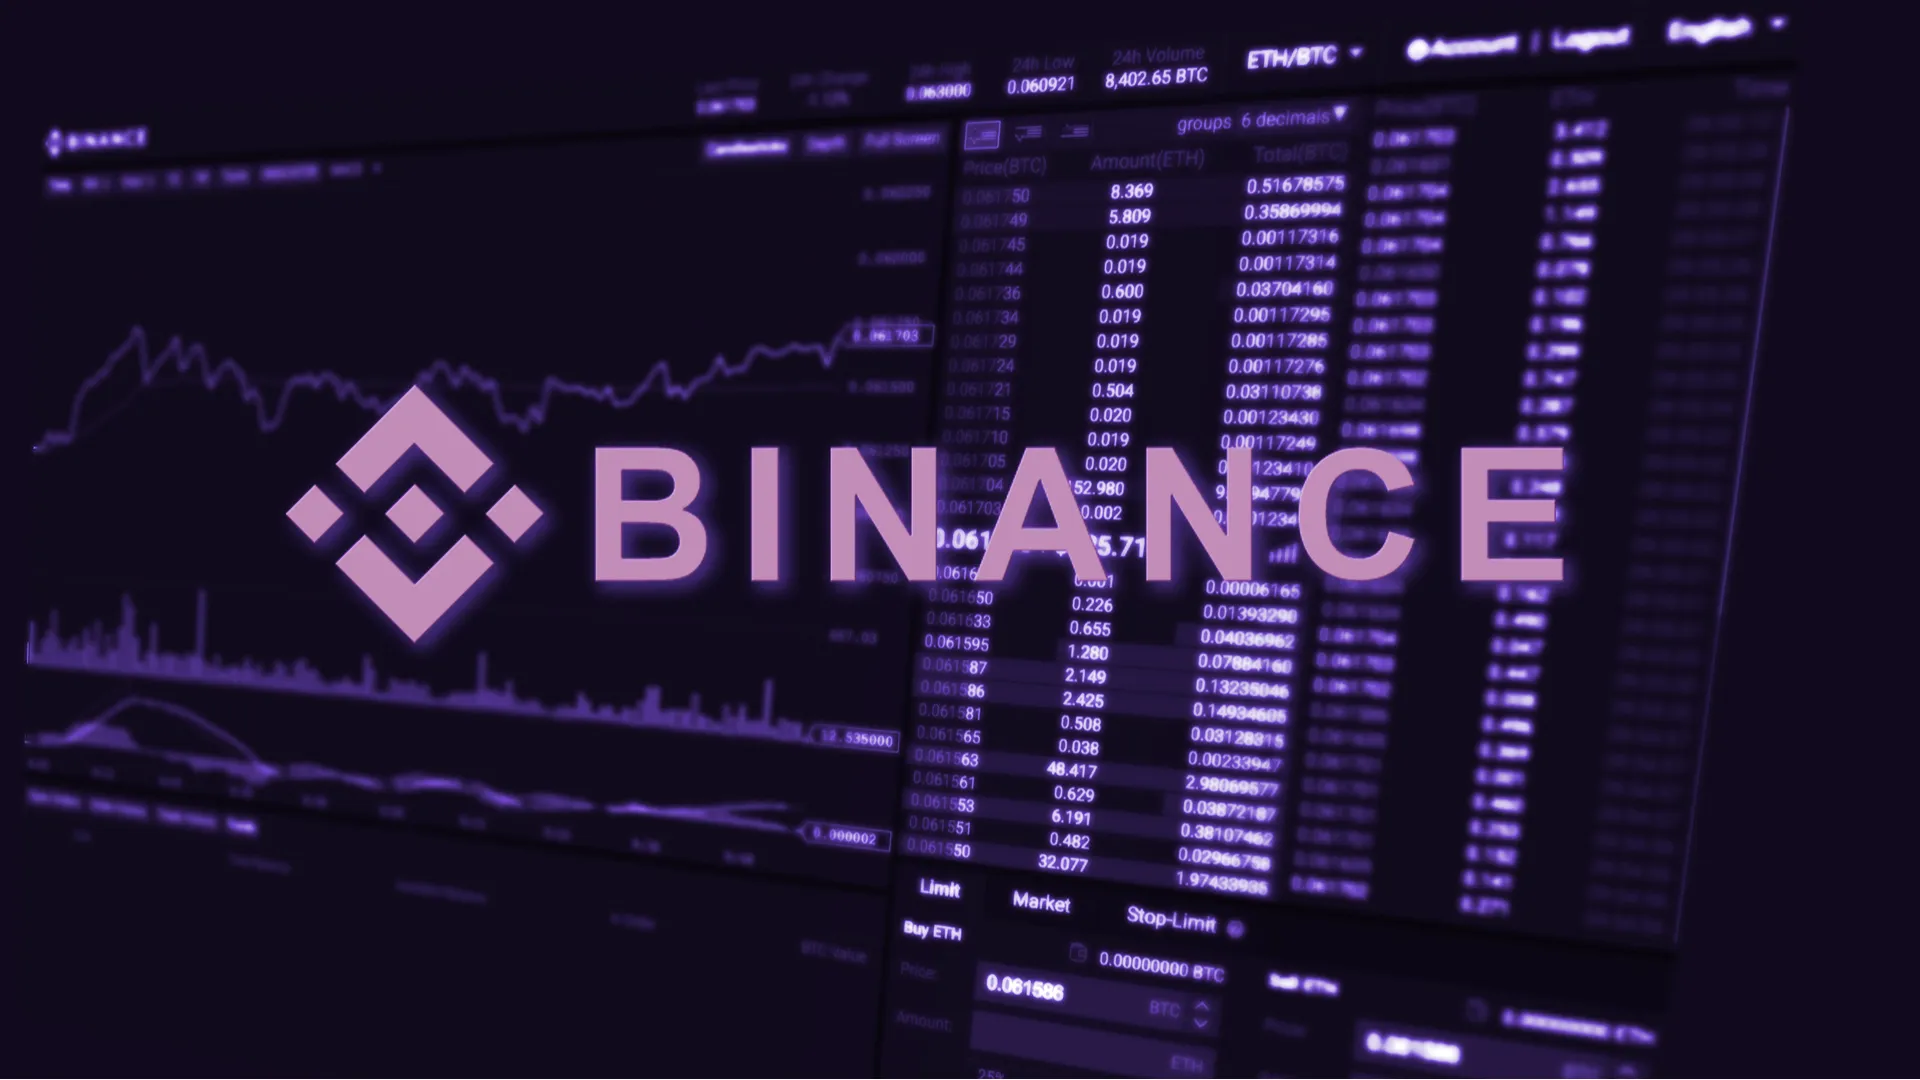 Binance unveils a perpetual contract for index of 10 DeFi protocols. Image: Shutterstock